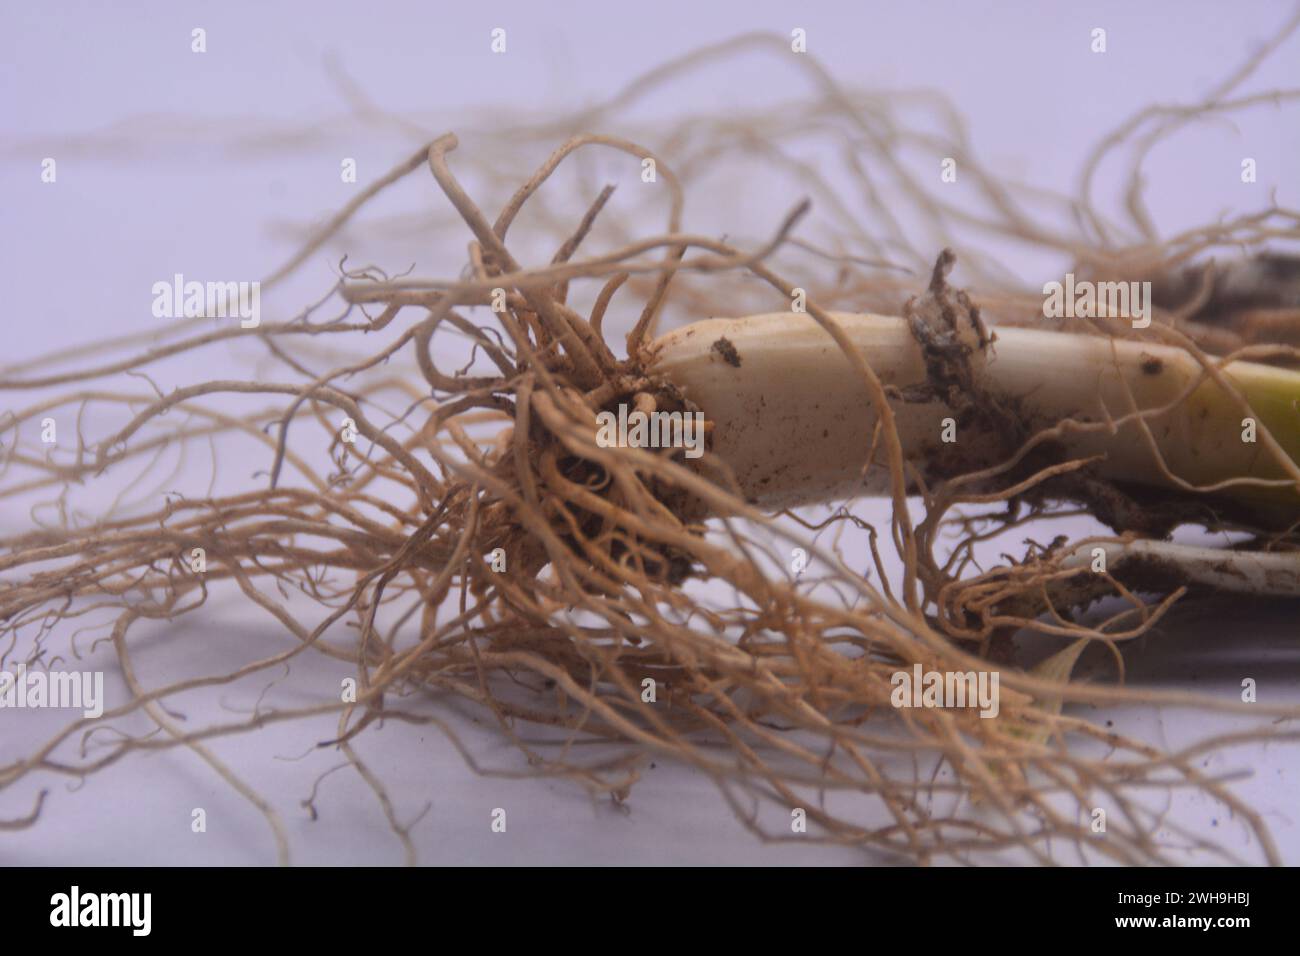 close up view of the root of leeks, has fibrous roots. The roots of leeks that have been taken and the remaining roots when soaked in water and then r Stock Photo